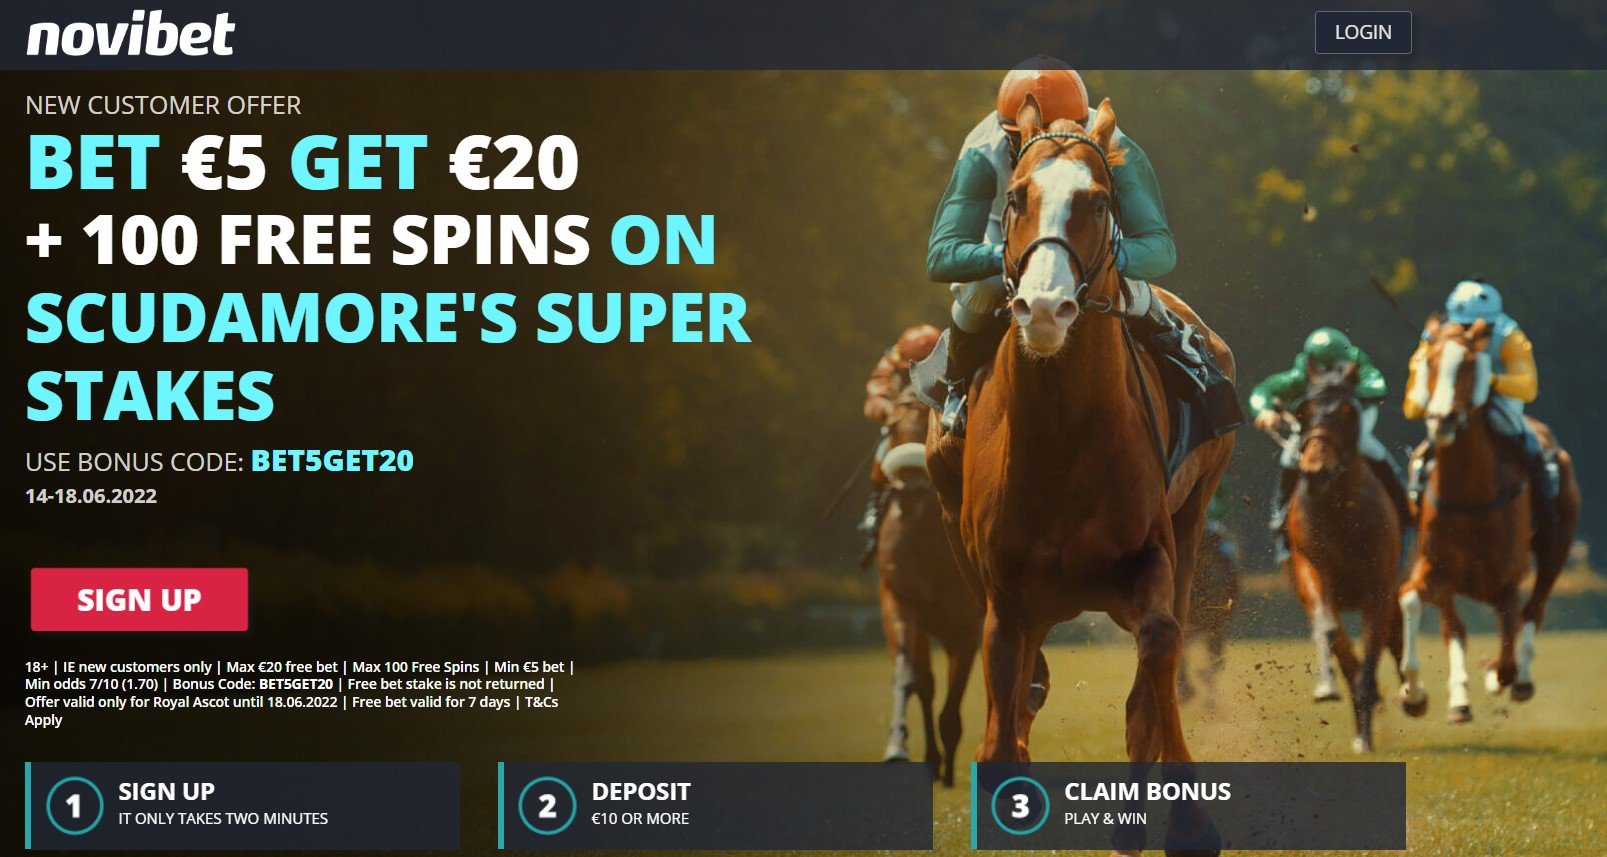 Novibet bet 5 get 20 and 100 free spins welcome offer